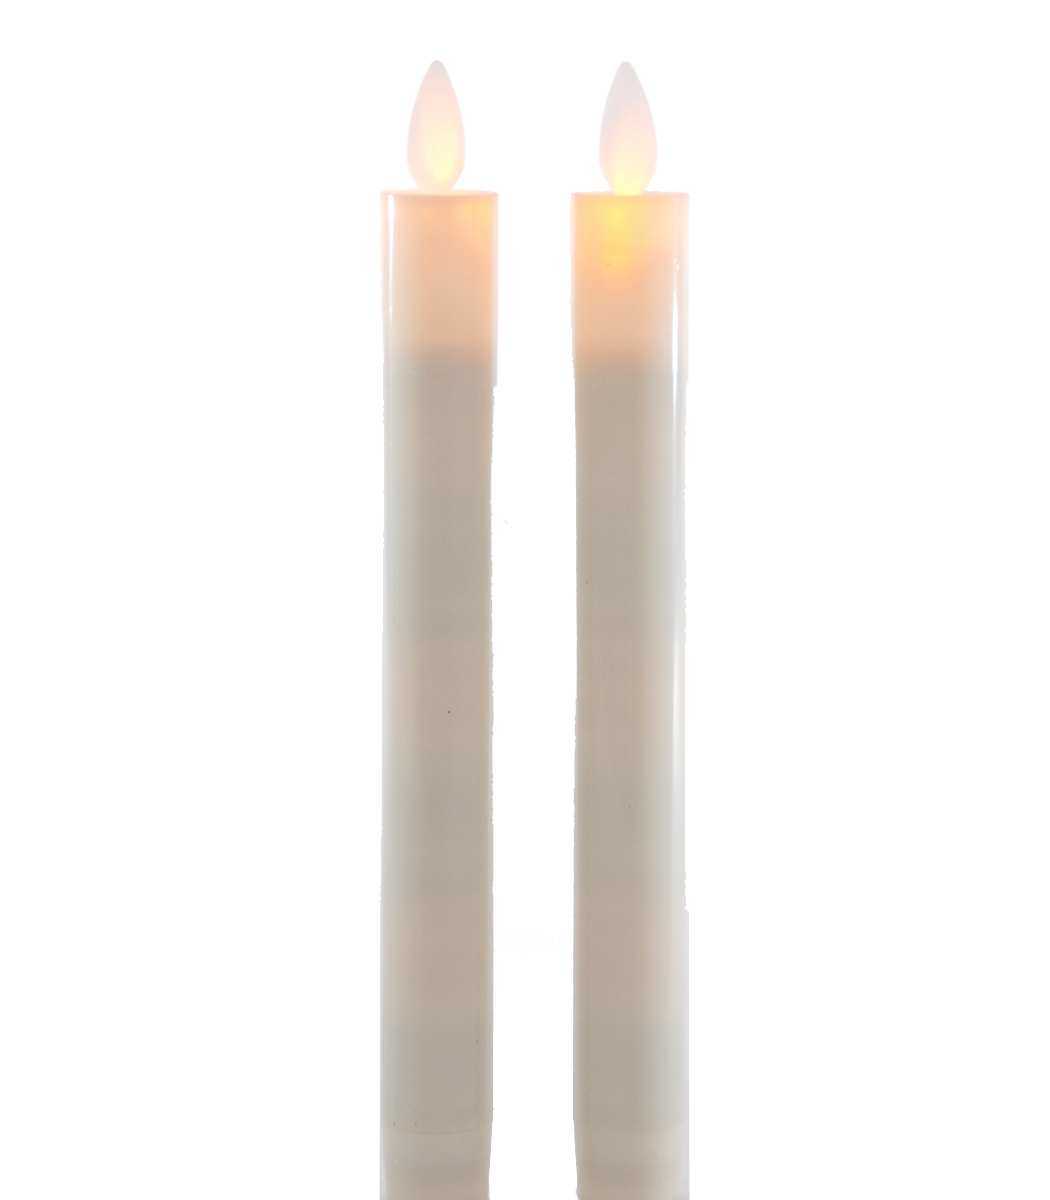 Shop now in UK Katherine's Collection 19-619003 Flicker Candles Set of 2